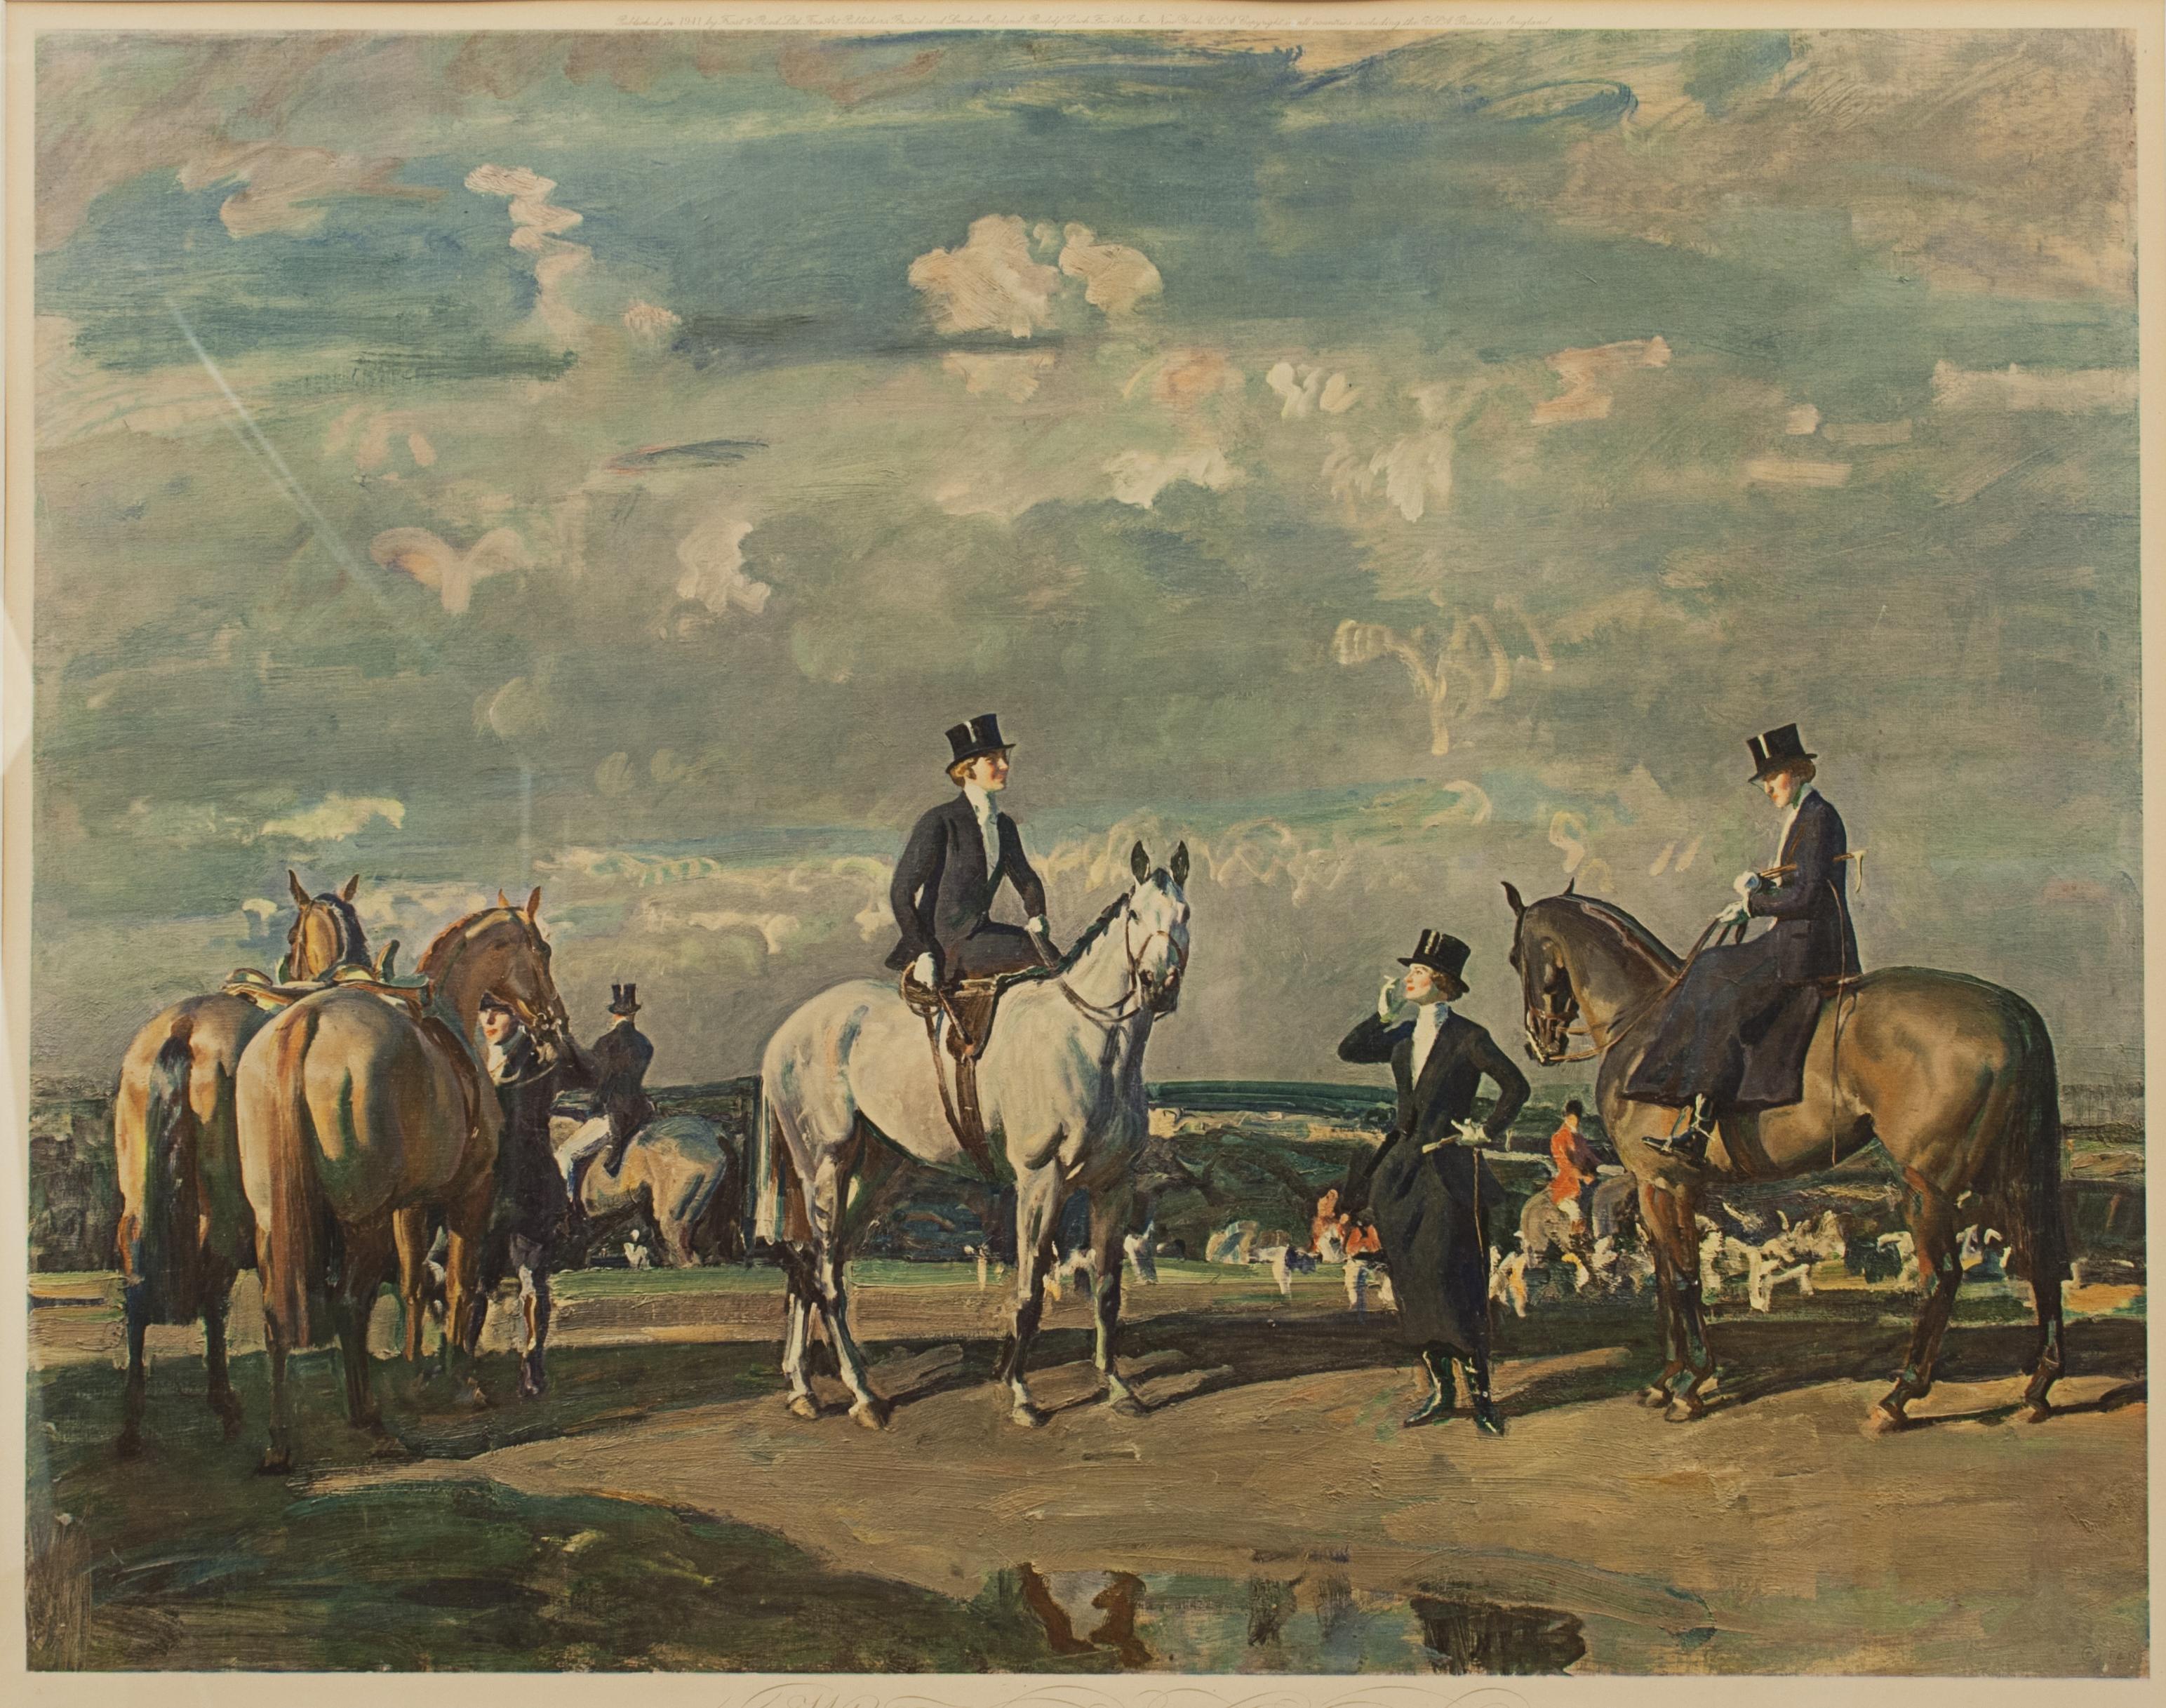 Sporting Art Why Weren't You Out Yesterday? by Alfred Munnings